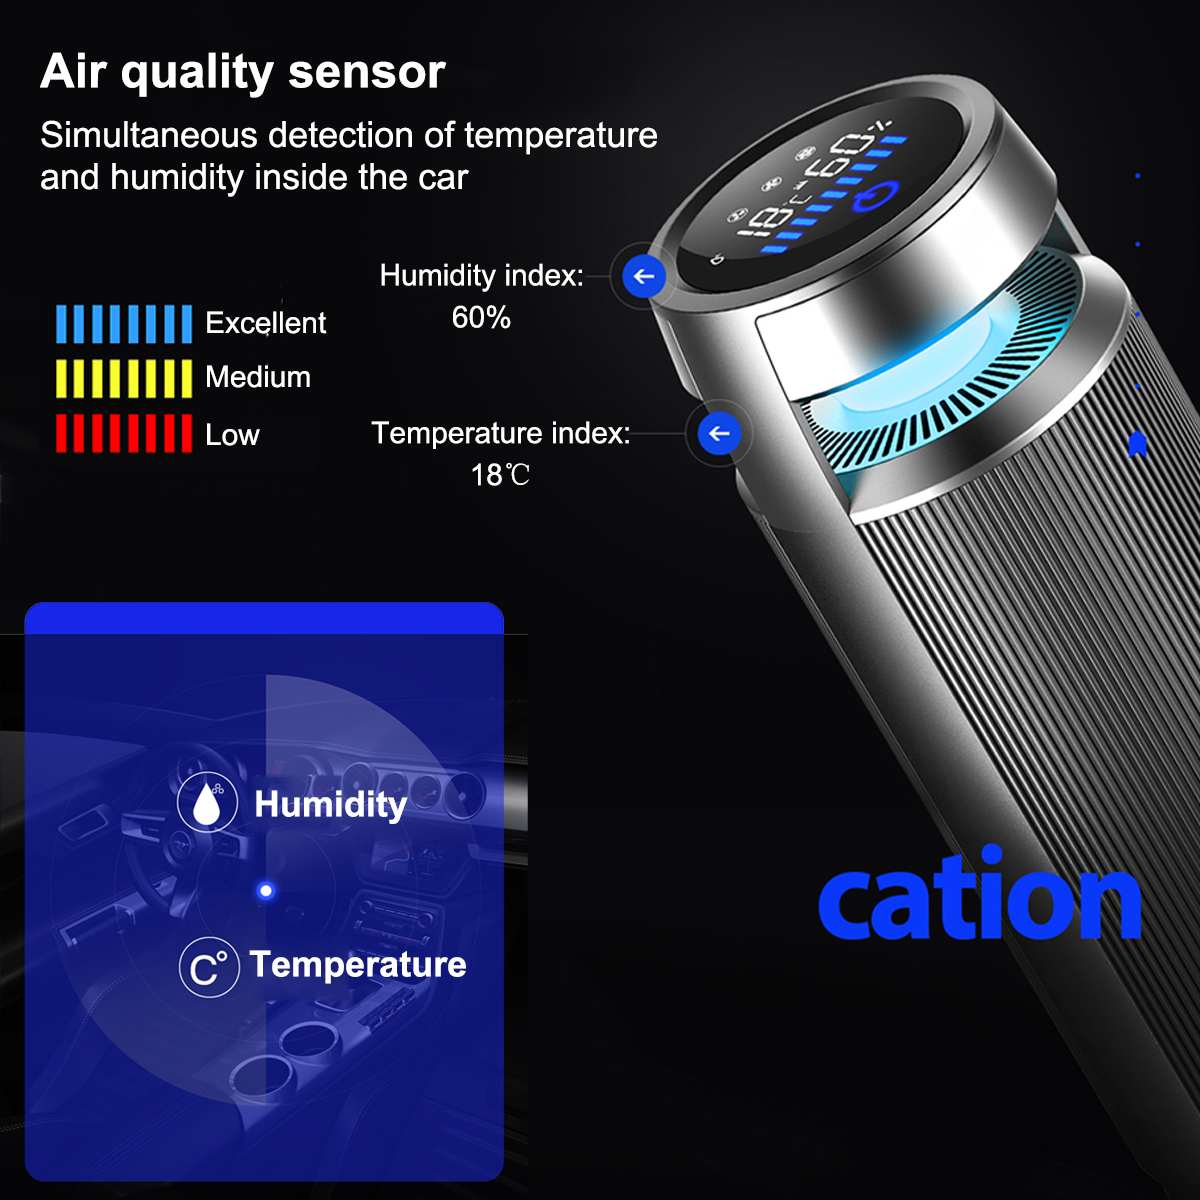 AUGIENB HEPA USB Car Air Purifier Negative Ion Air Cleaner for PM2.5 Formaldehyde Smoke Odor Allergies with LED Light Room